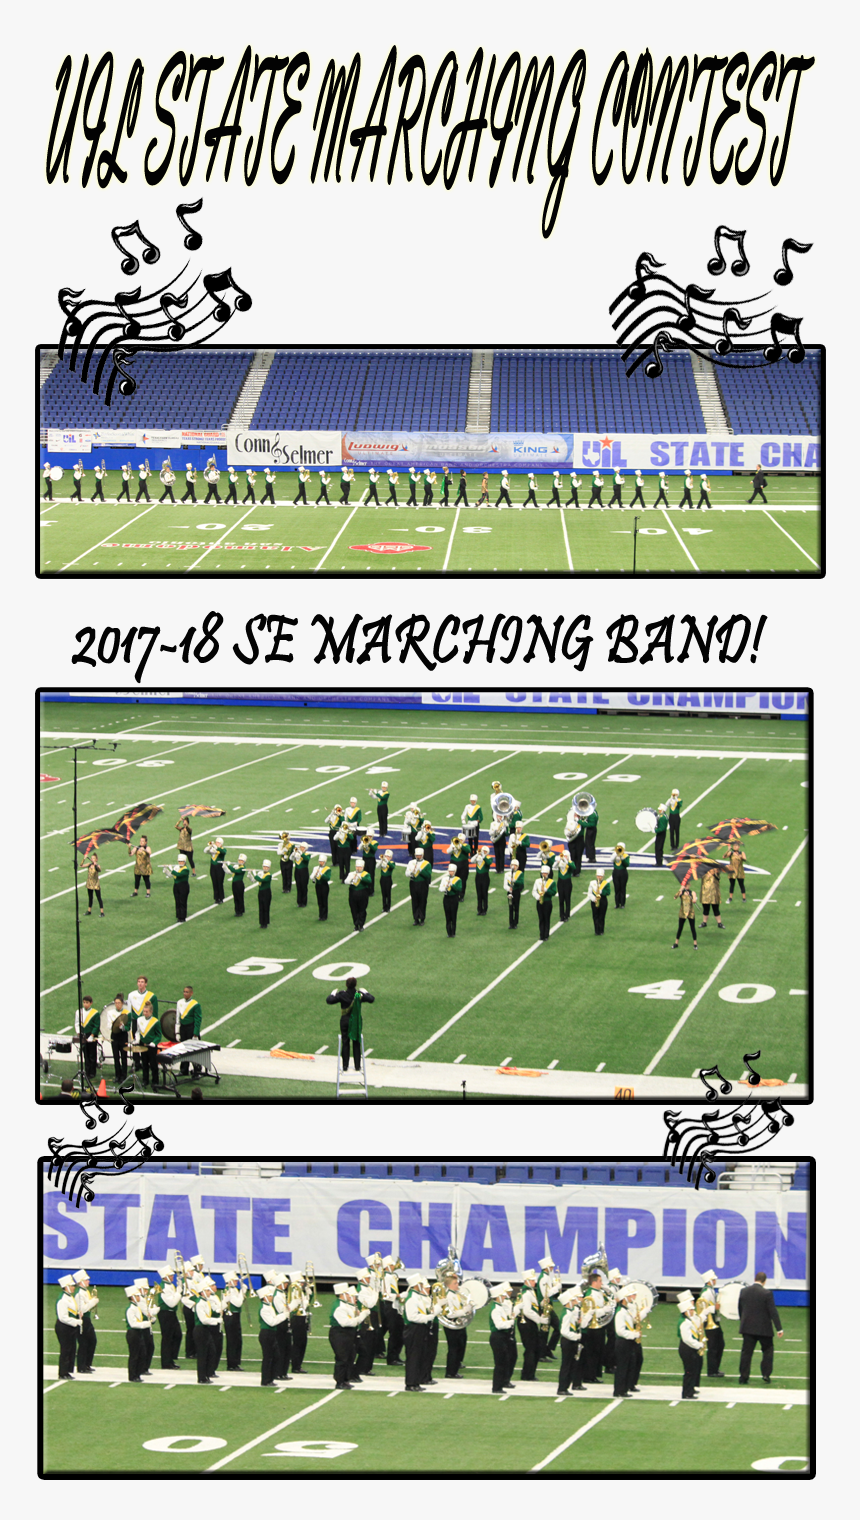 Springlake-earth High School - Marching Band, HD Png Download, Free Download